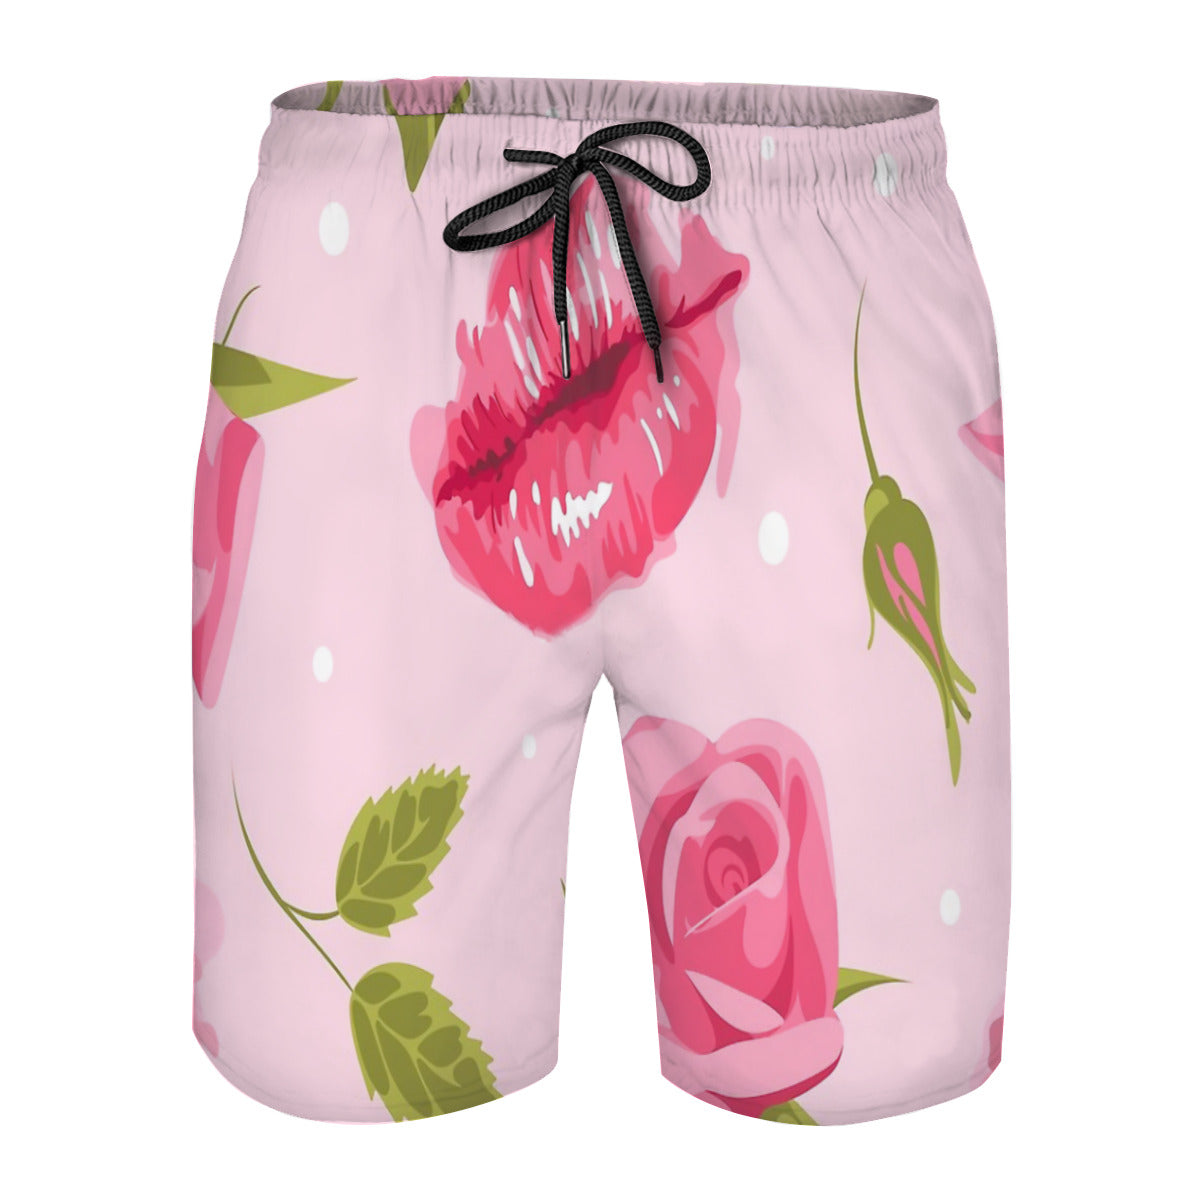 Floral Girly Pattern Pinky Floral Seamless Exotic Watercolor Garden Graphic Men's Swim Trunks No.4GU5Z9